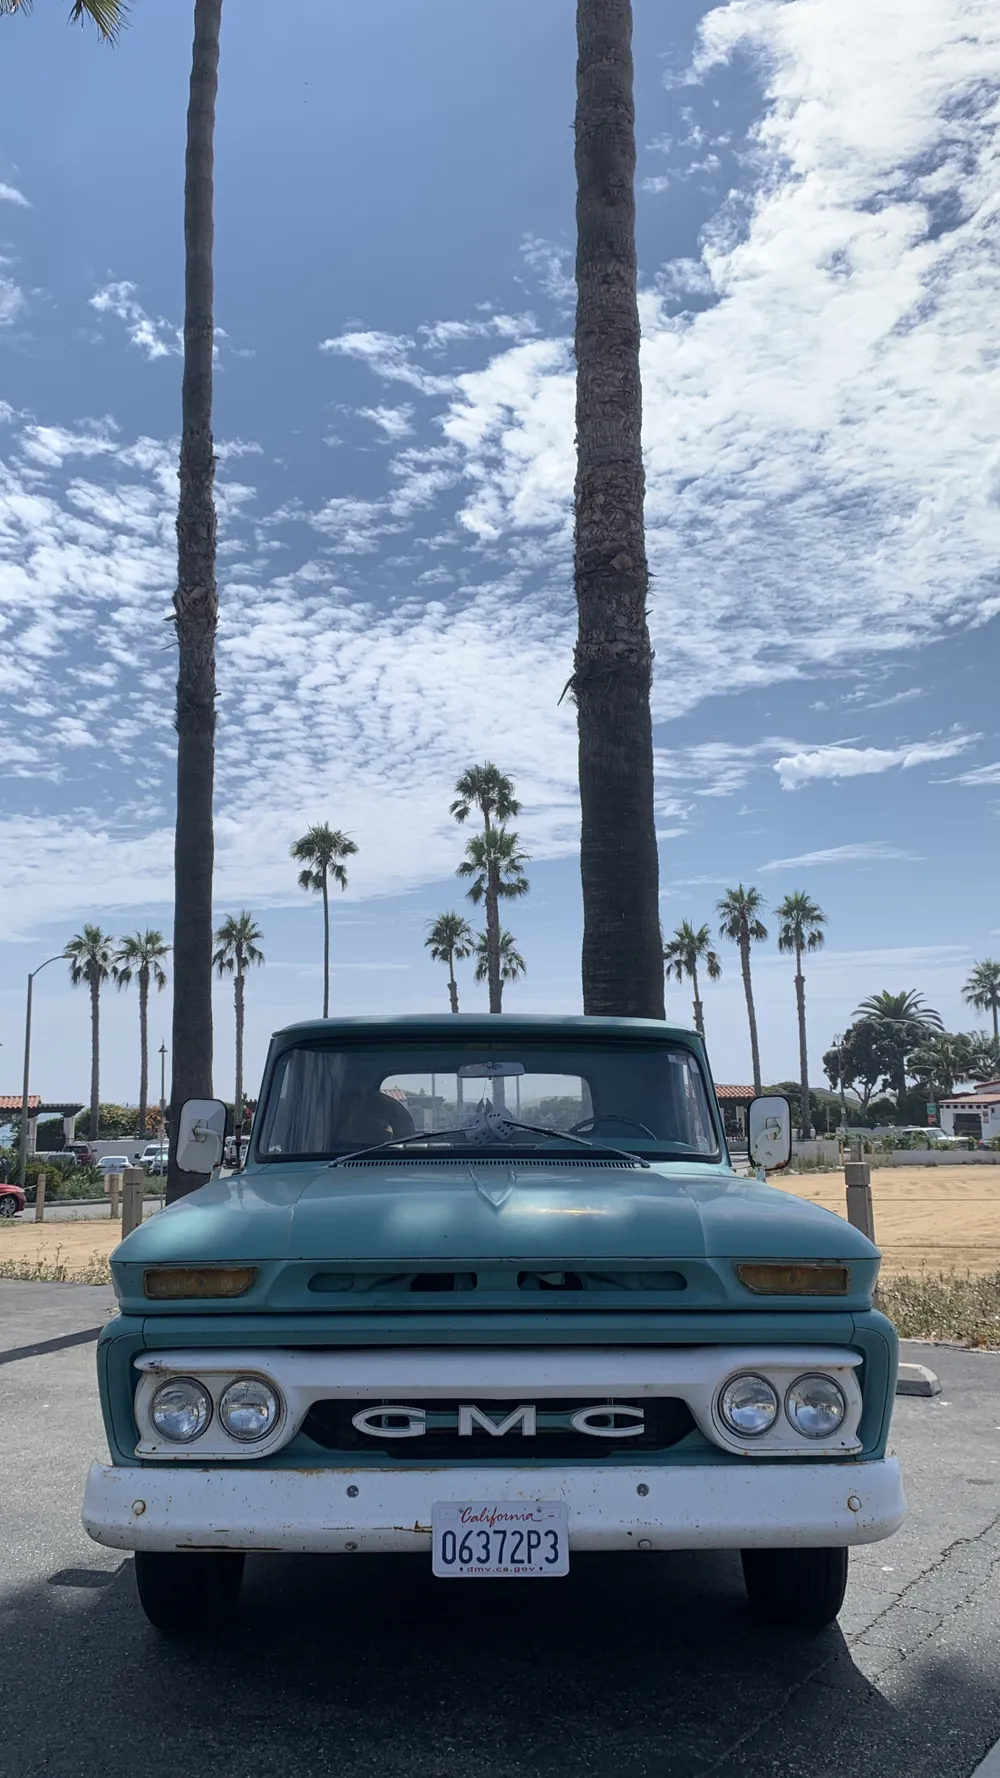 Driving up the coast sat a vintage GMC truck and a beautiful view of the palm tress behind it.